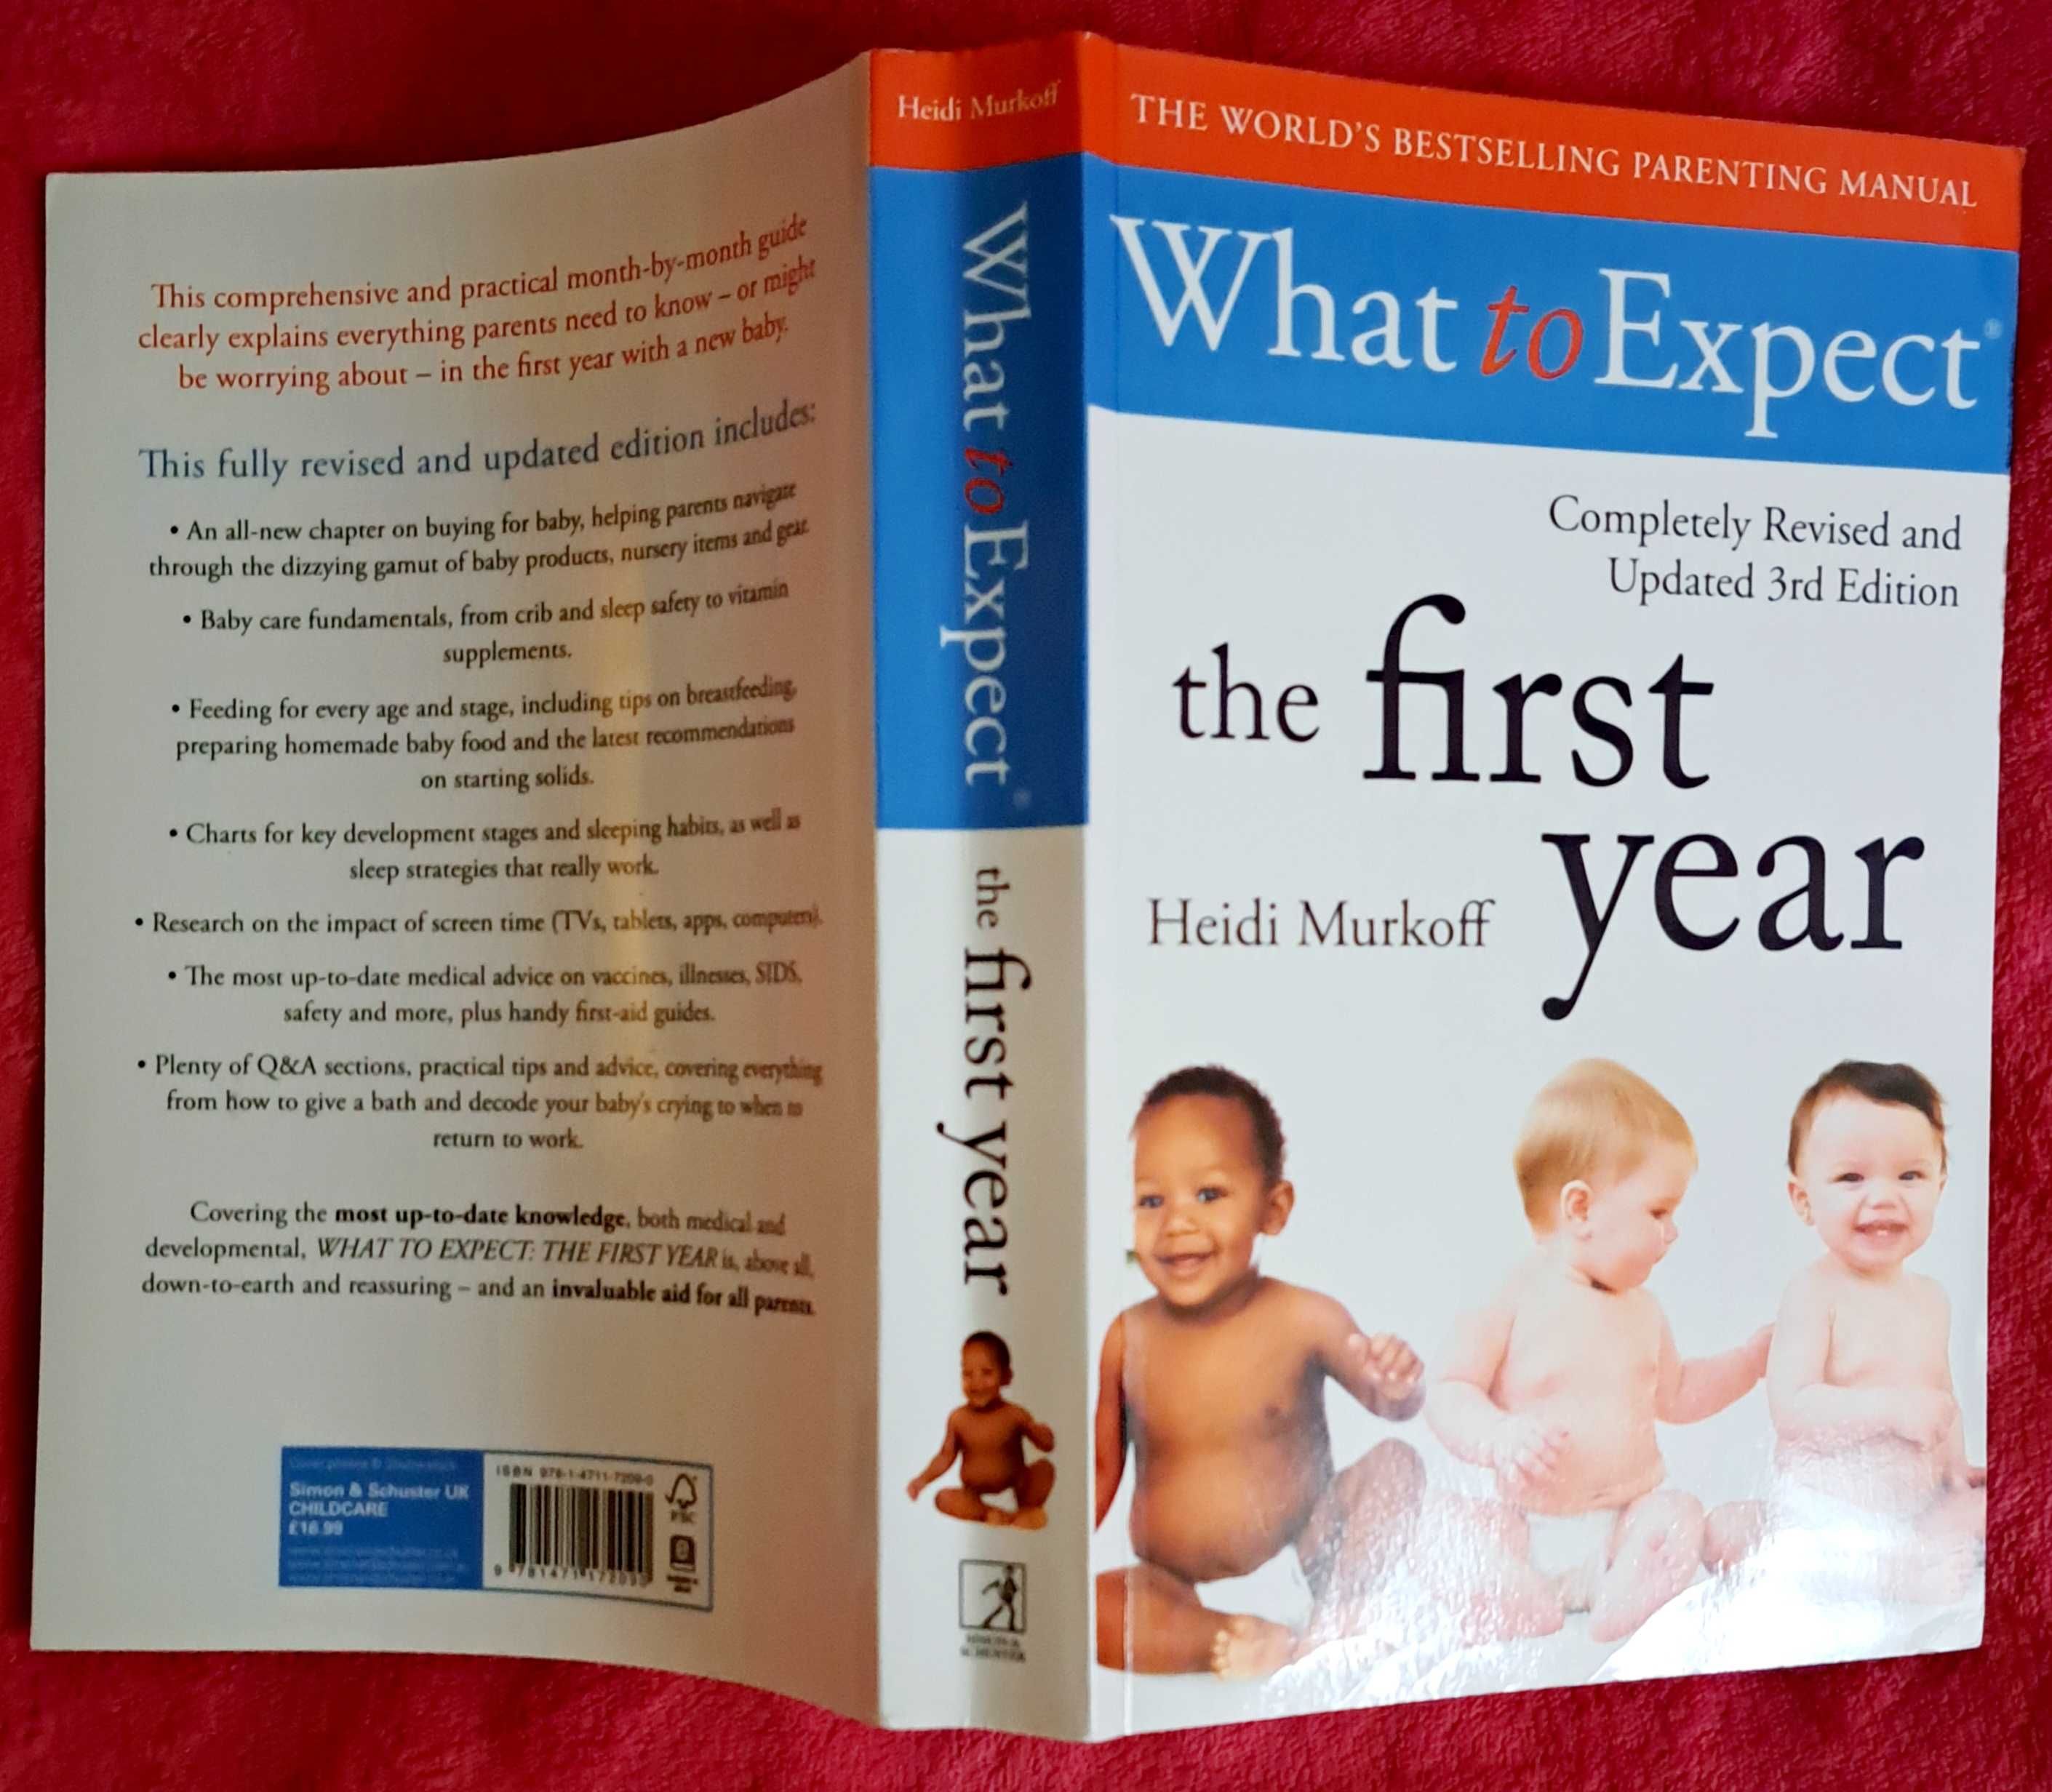 What to Expect the first year - Heidi Murkoff